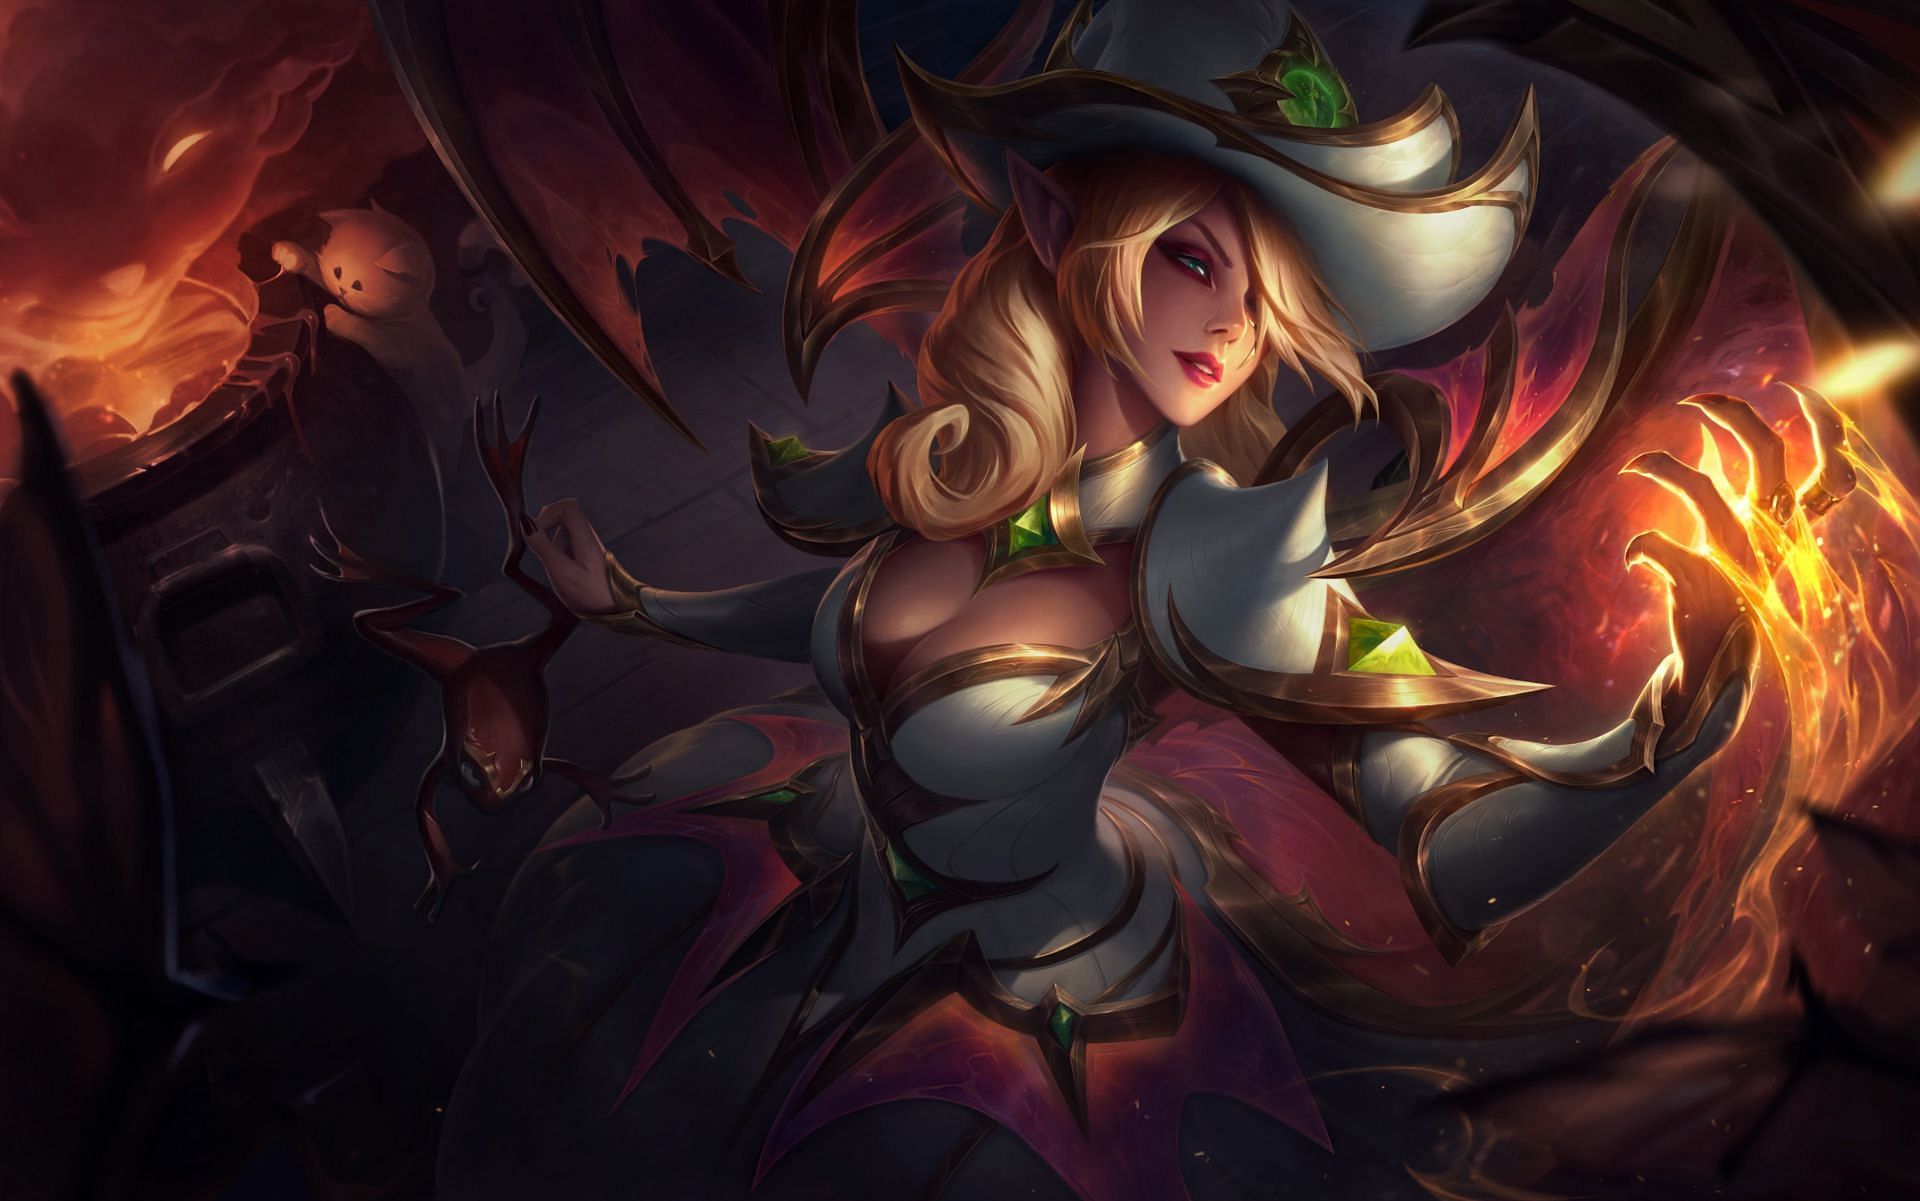 League of Legends leaks have revealed information on brand new Bewitching skins set for Halloween 2022 release (Image via Riot Games) 